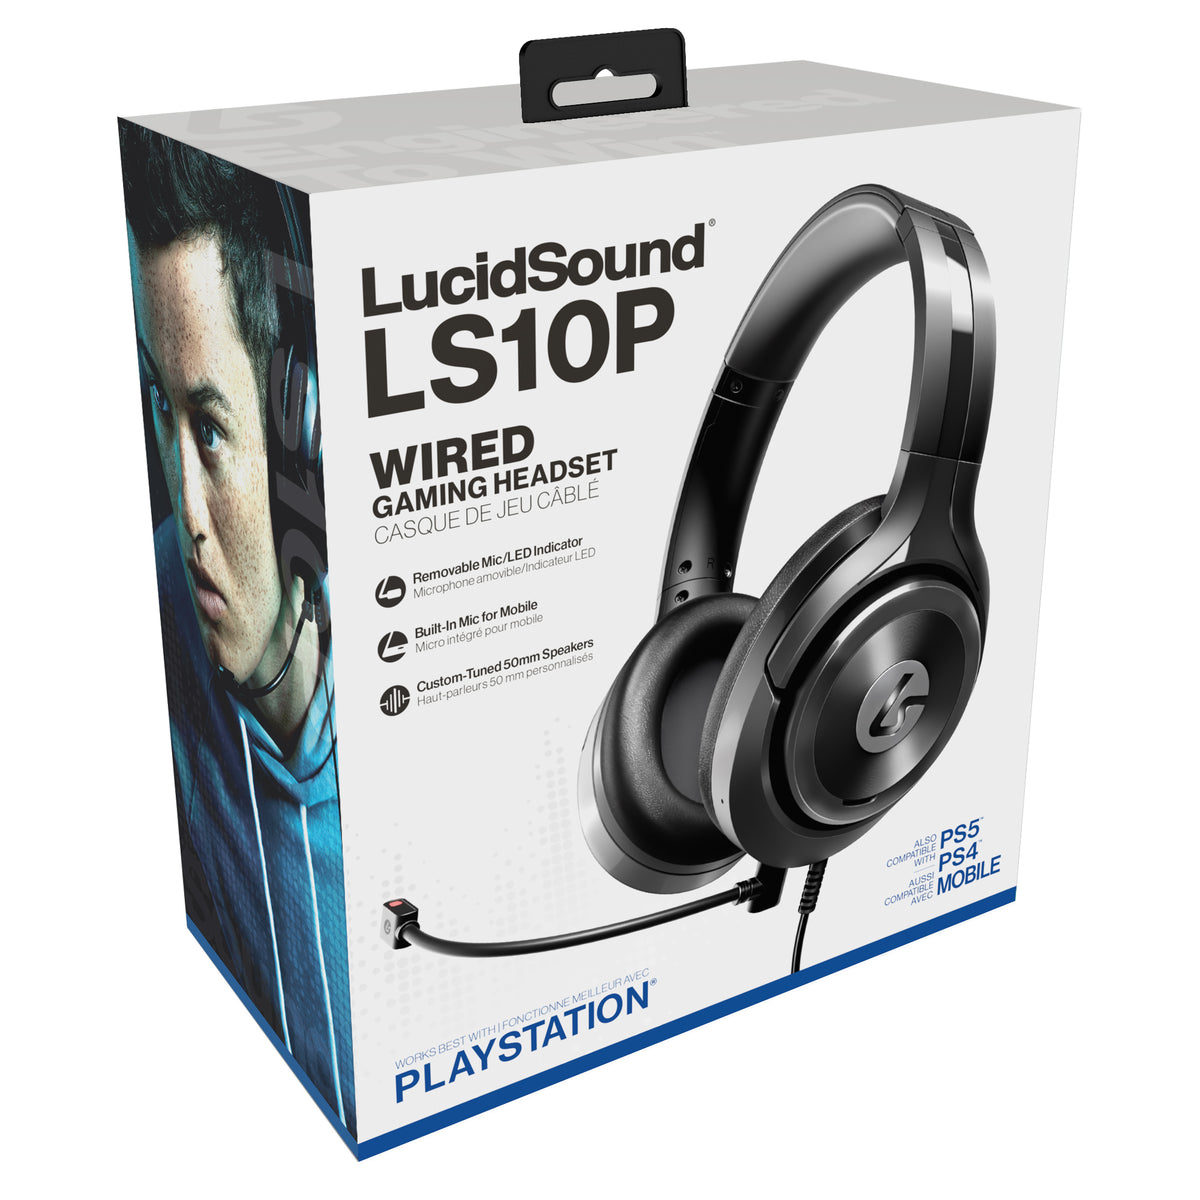 LucidSound LS10P Wired Stereo Gaming Headset with Mic for PlayStation - Black